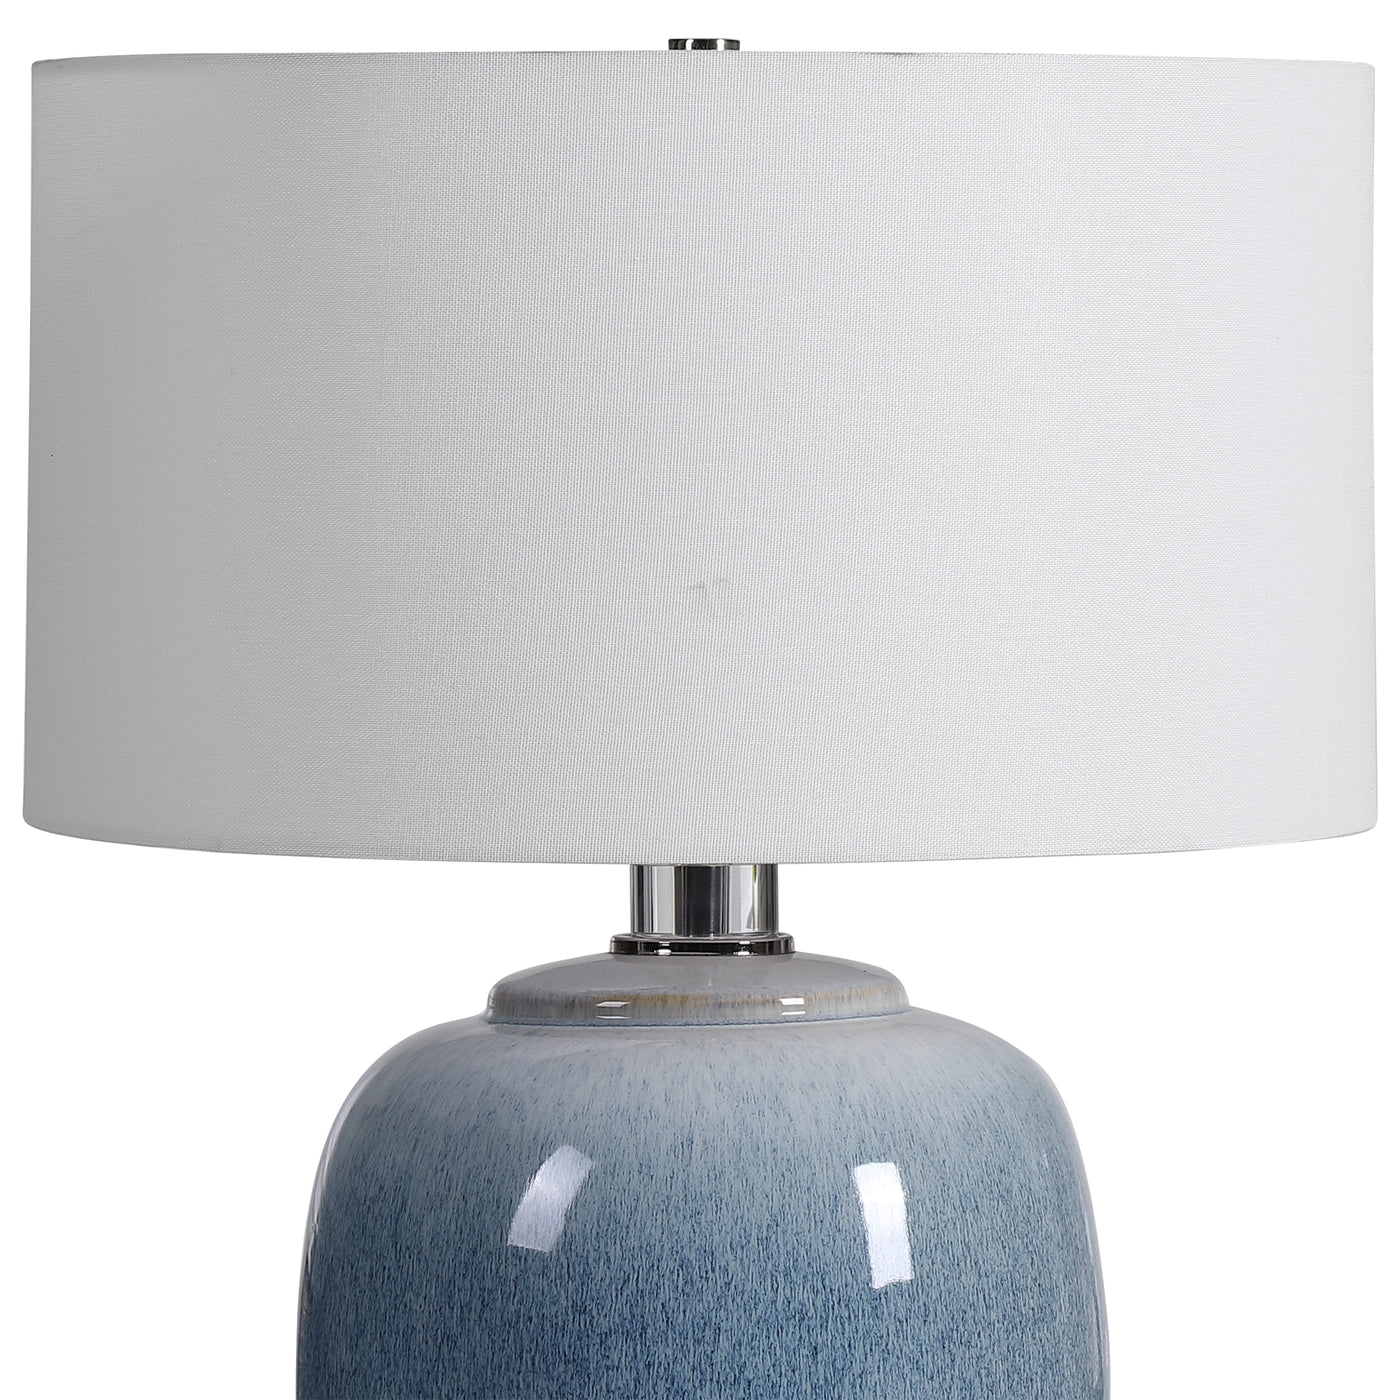 Ceramic Table Lamp Showcases Vibrant Shades Of Cobalt And Aqua That Transition Into A Subtle Ombre Toned Light Blue. Polis...